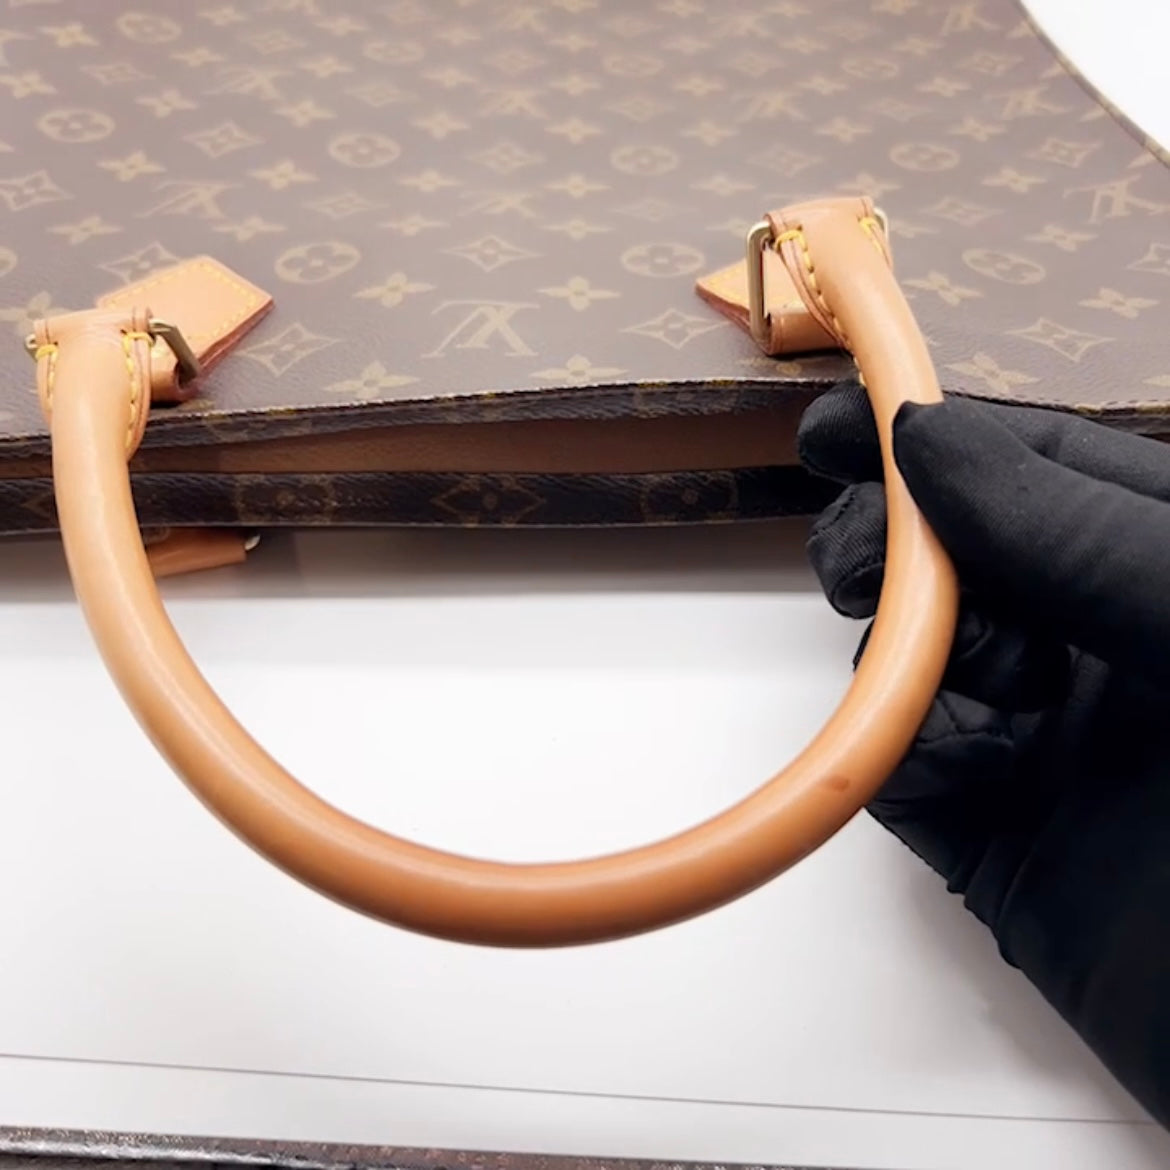 I Thrifted a Pre-Loved Vintage Louis Vuitton Sac Plat Bag $519 